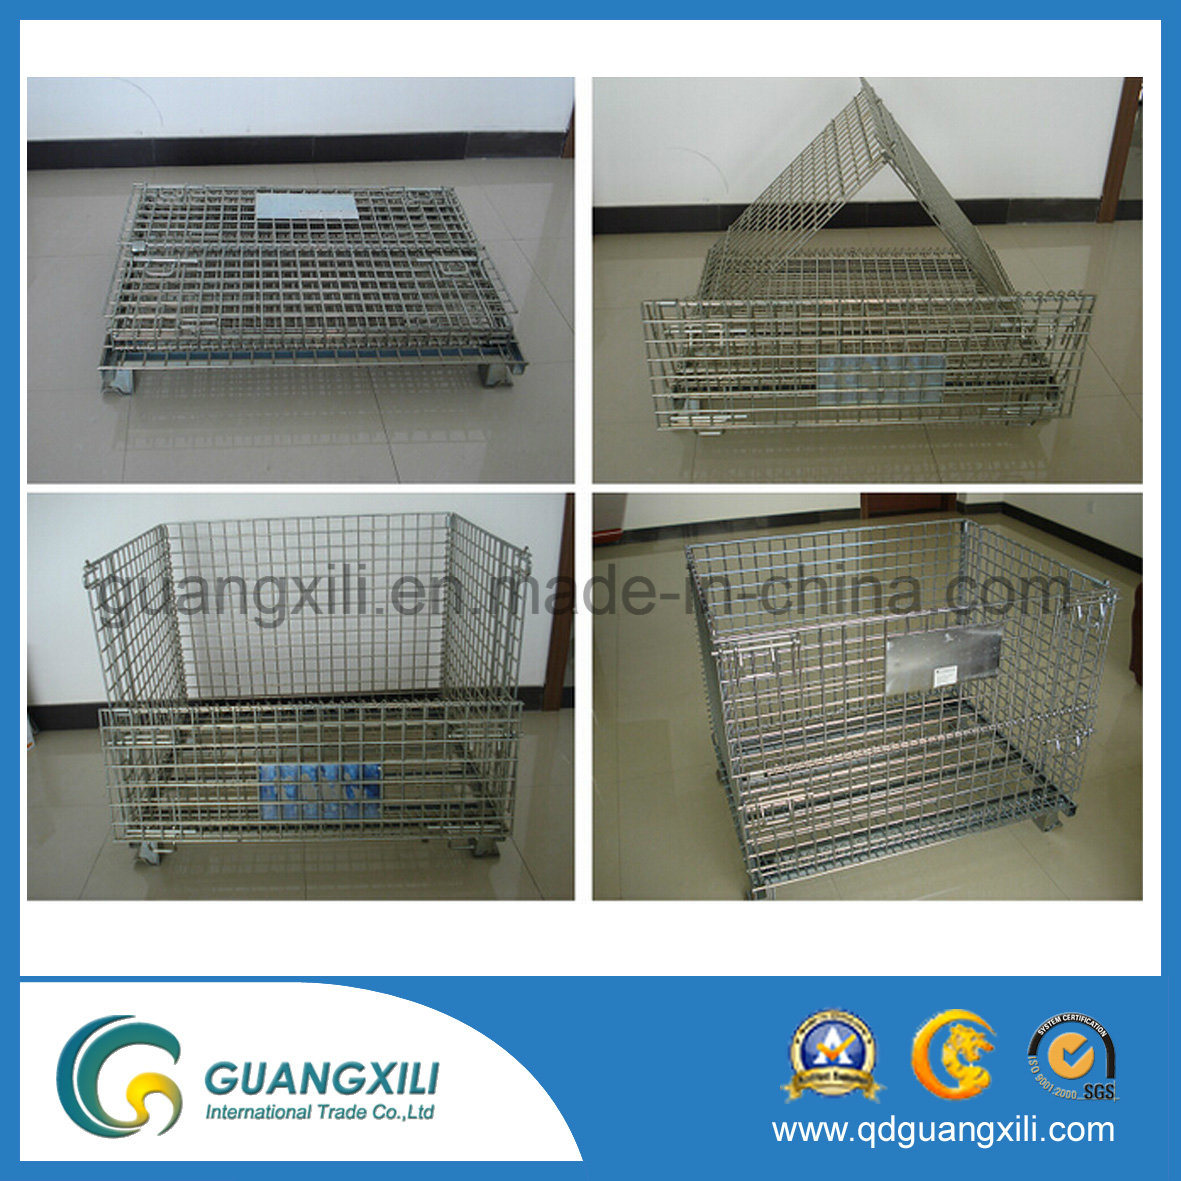 /proimages/2f0j00pKTQIkaETNuD/foldable-stack-racking-for-textile-with-ce-approval.jpg